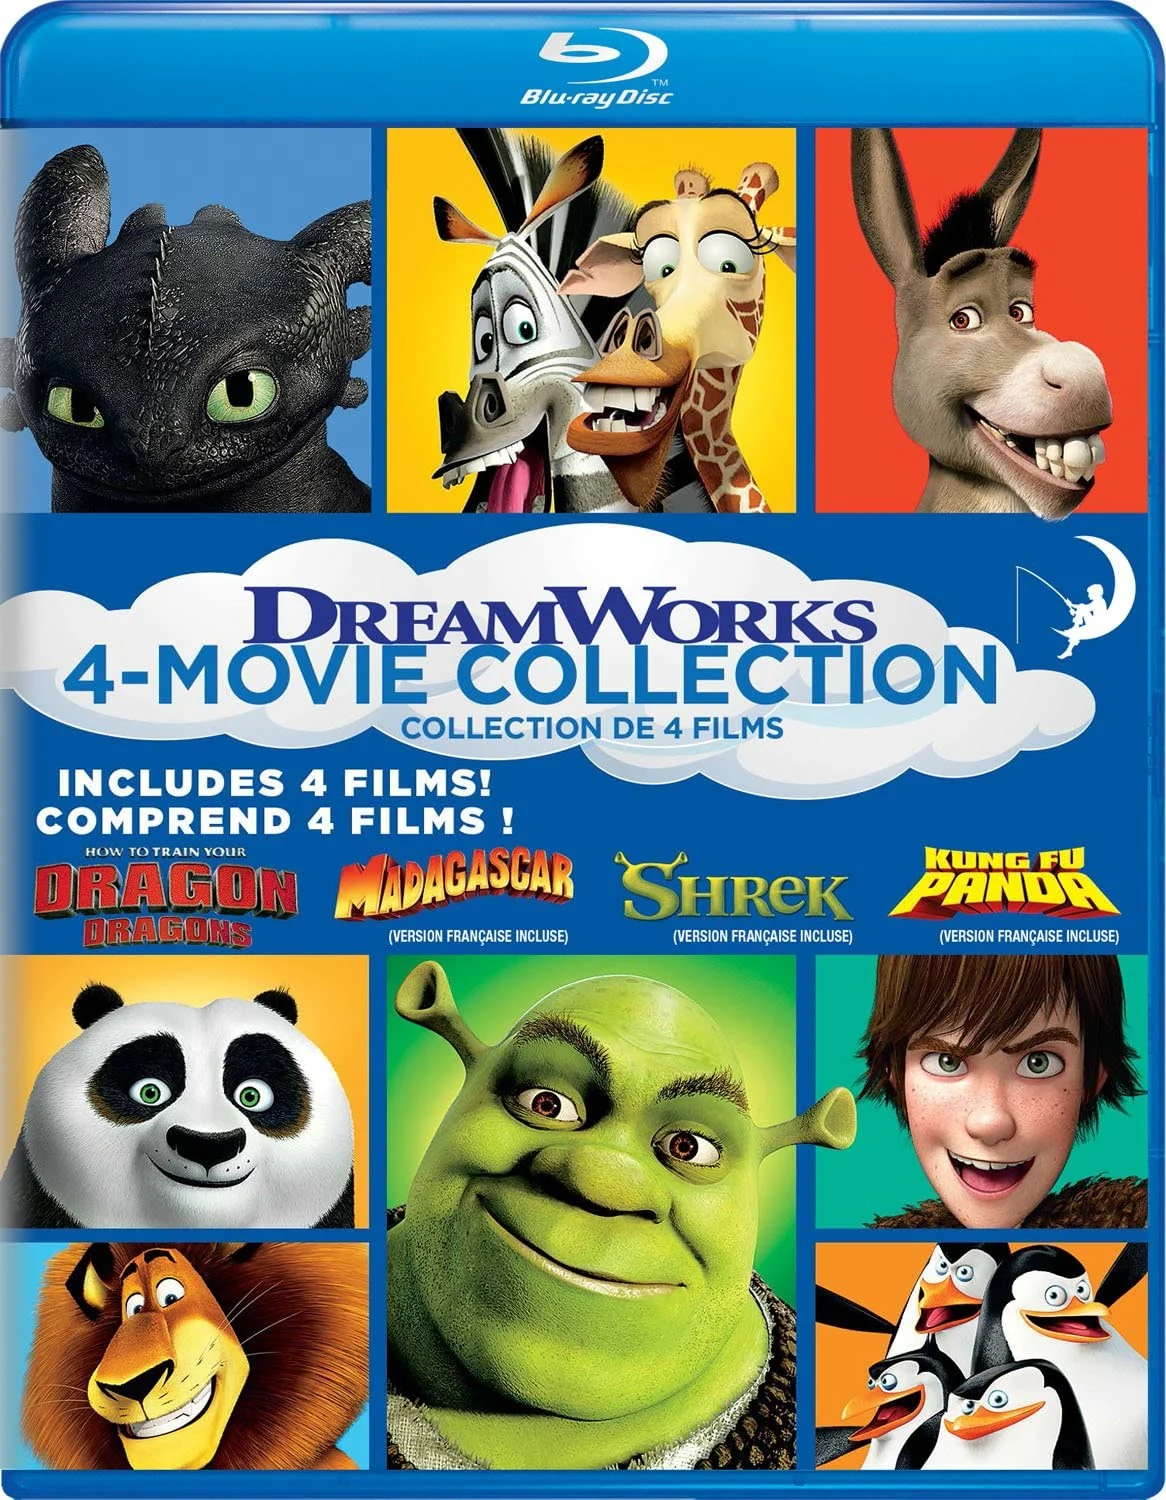 DreamWorks: 4-Movie Collection (Blu-ray) on MovieShack